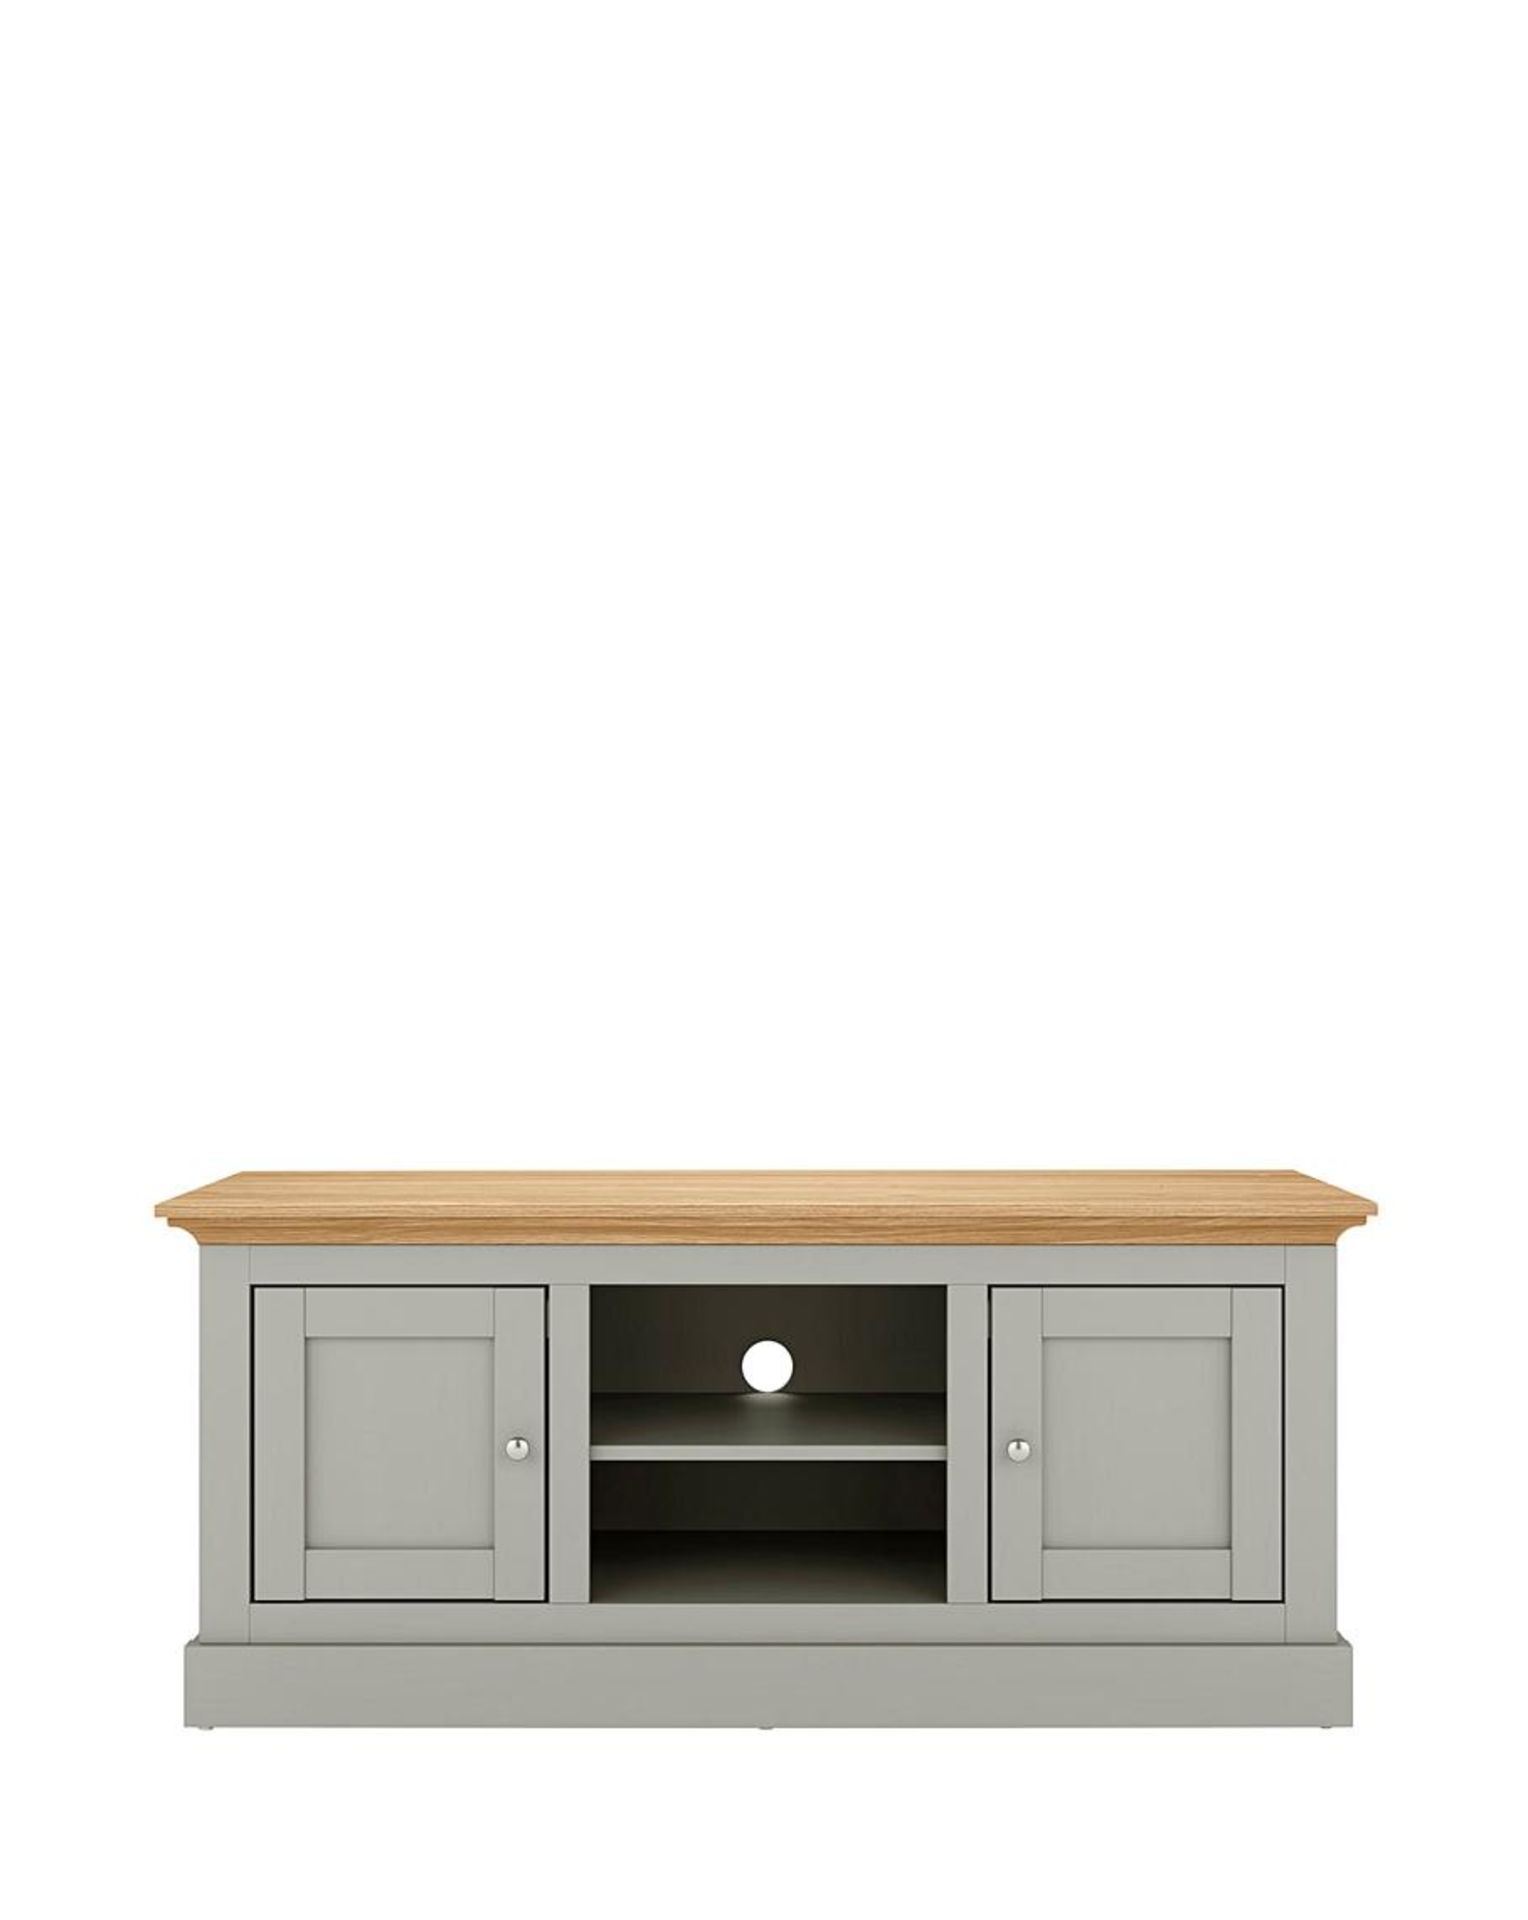 Julipa Ashford Wide TV Stand. RRP £349.00. Bring an elegant country-style charm into your bedroom